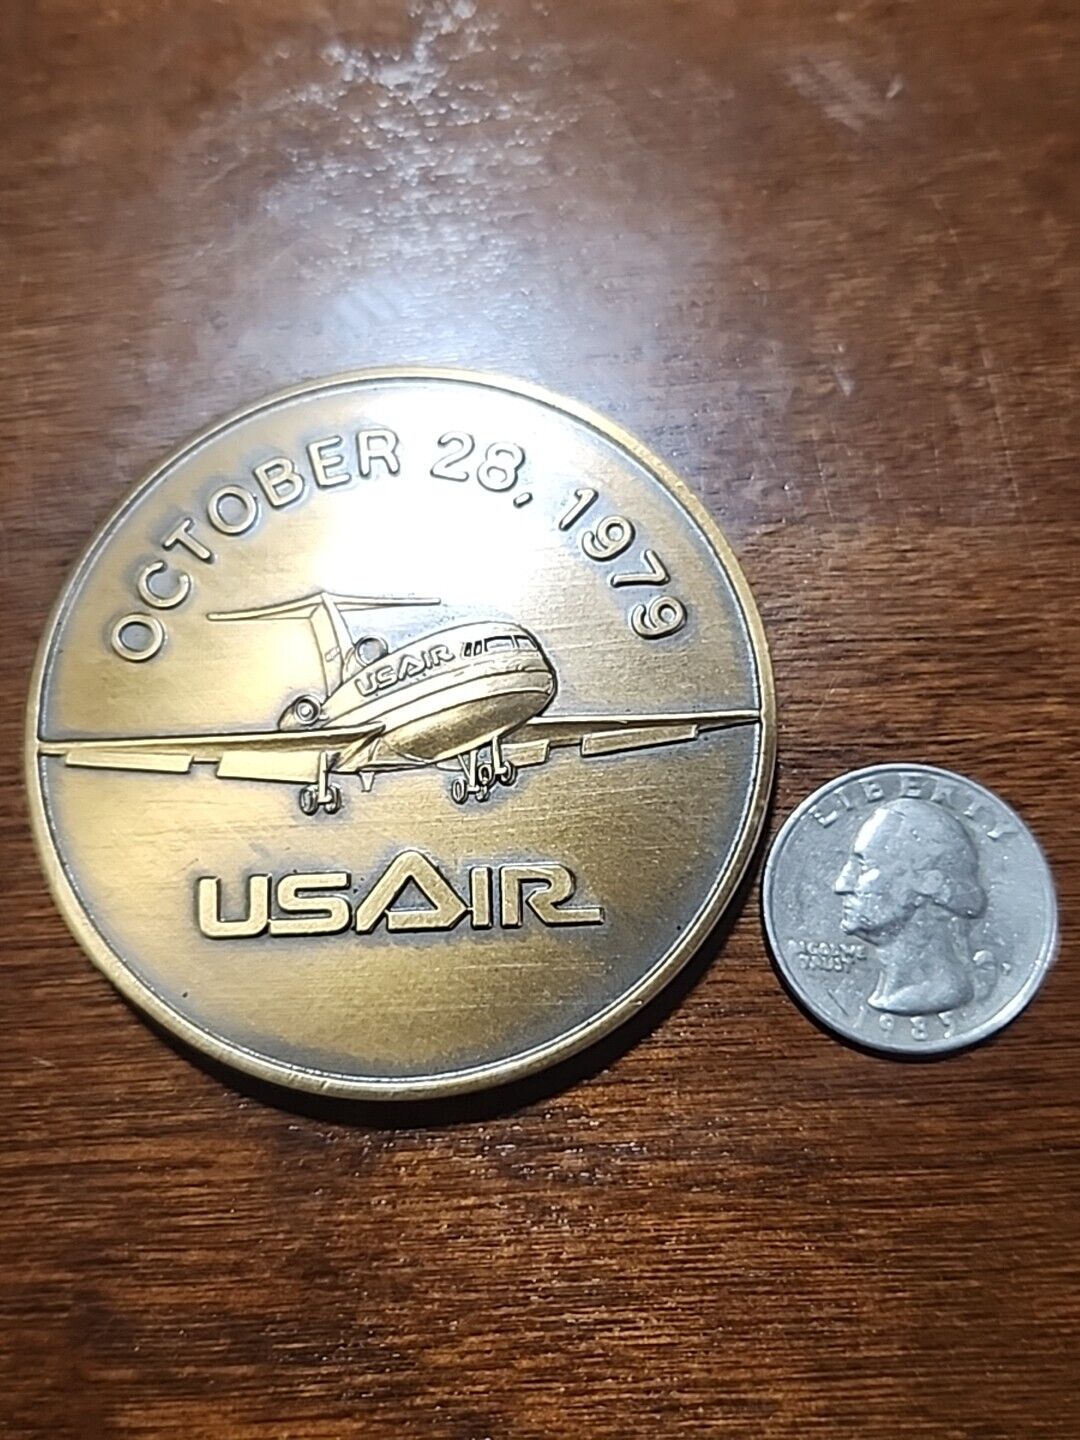 Oversized October 28 1979 USAir Airlines Commemorative Coin Medal